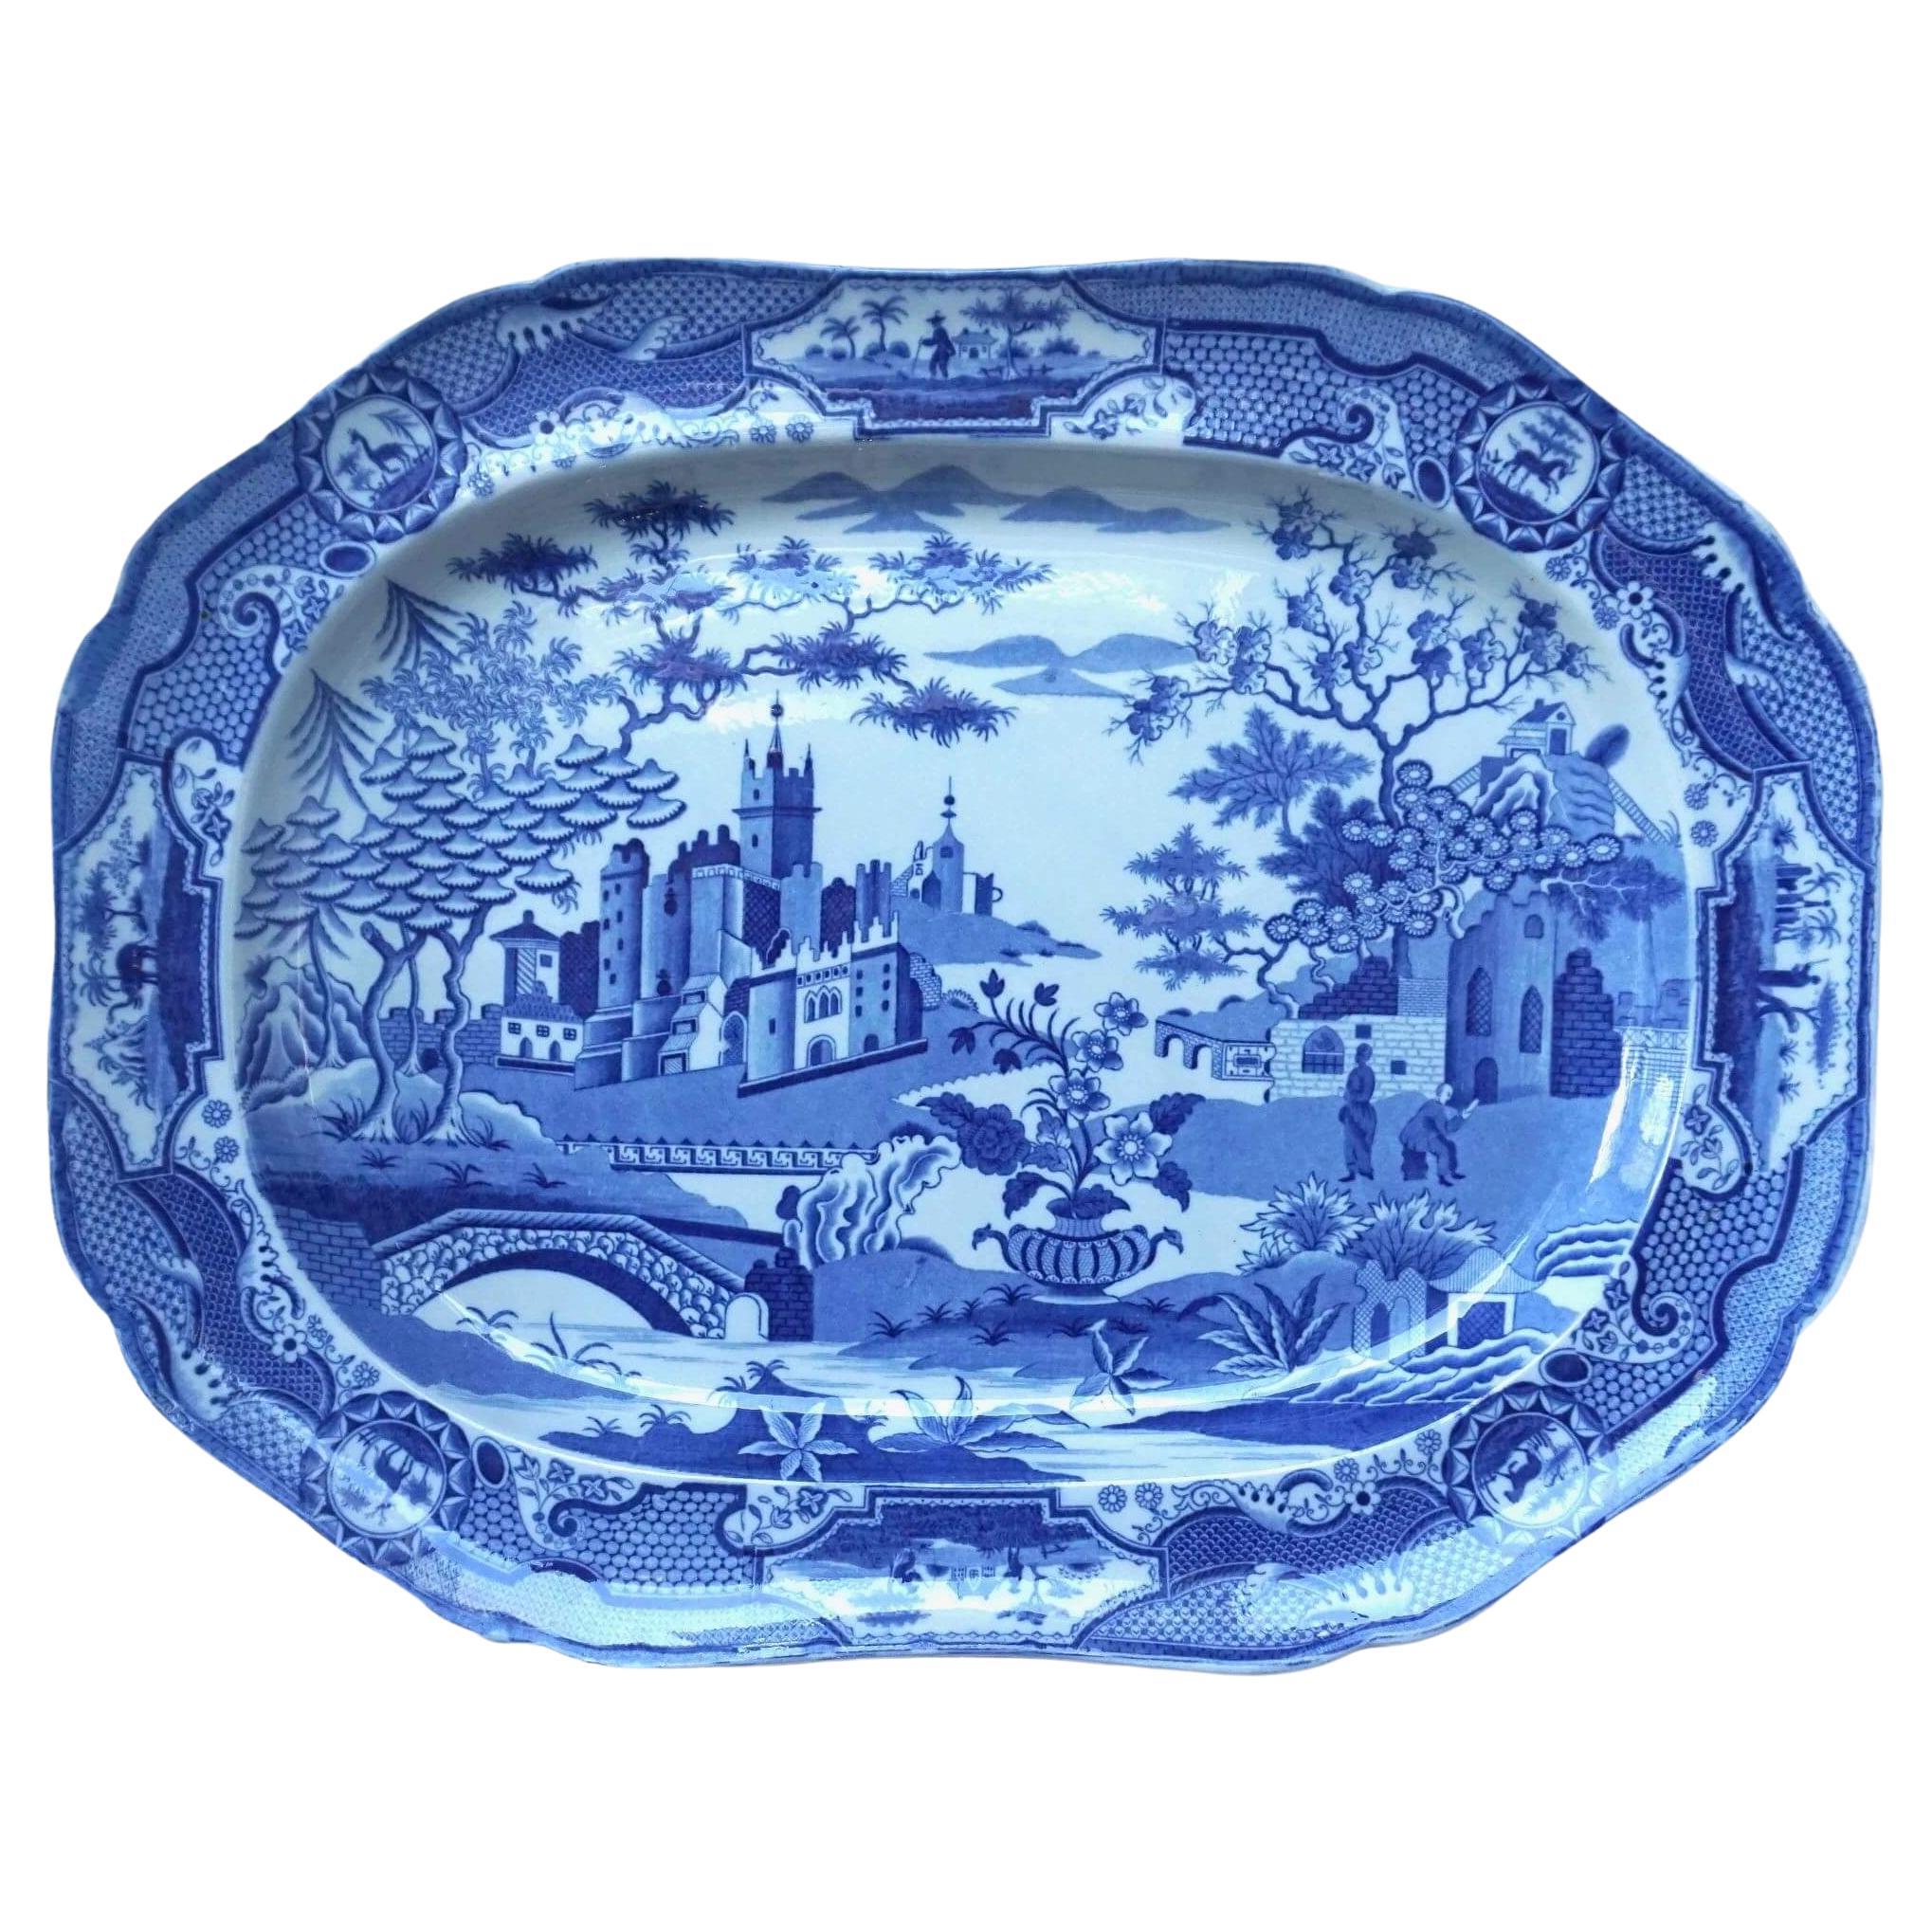 Spode 'Gothic Castles' Large Blue and White Staffordshire Platter, circa 1815 For Sale